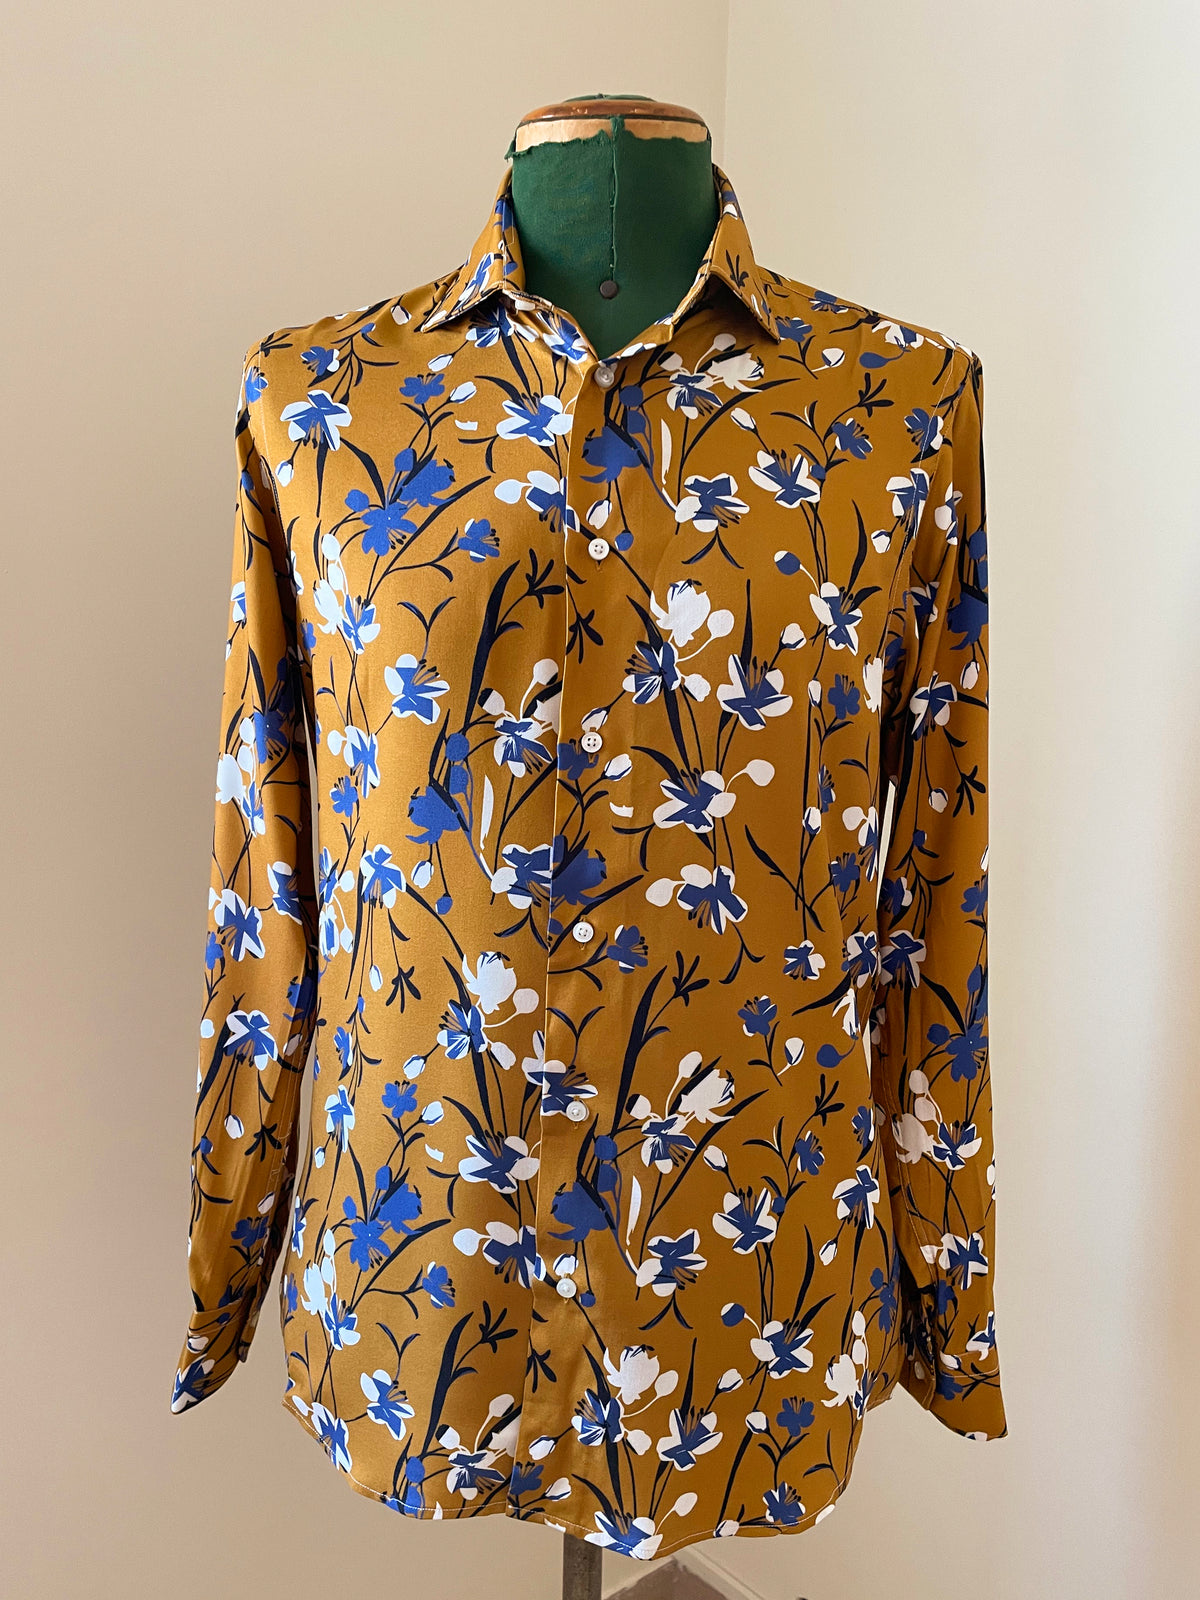 SILK SHIRT WITH FLORAL PRINT TIE335.V4